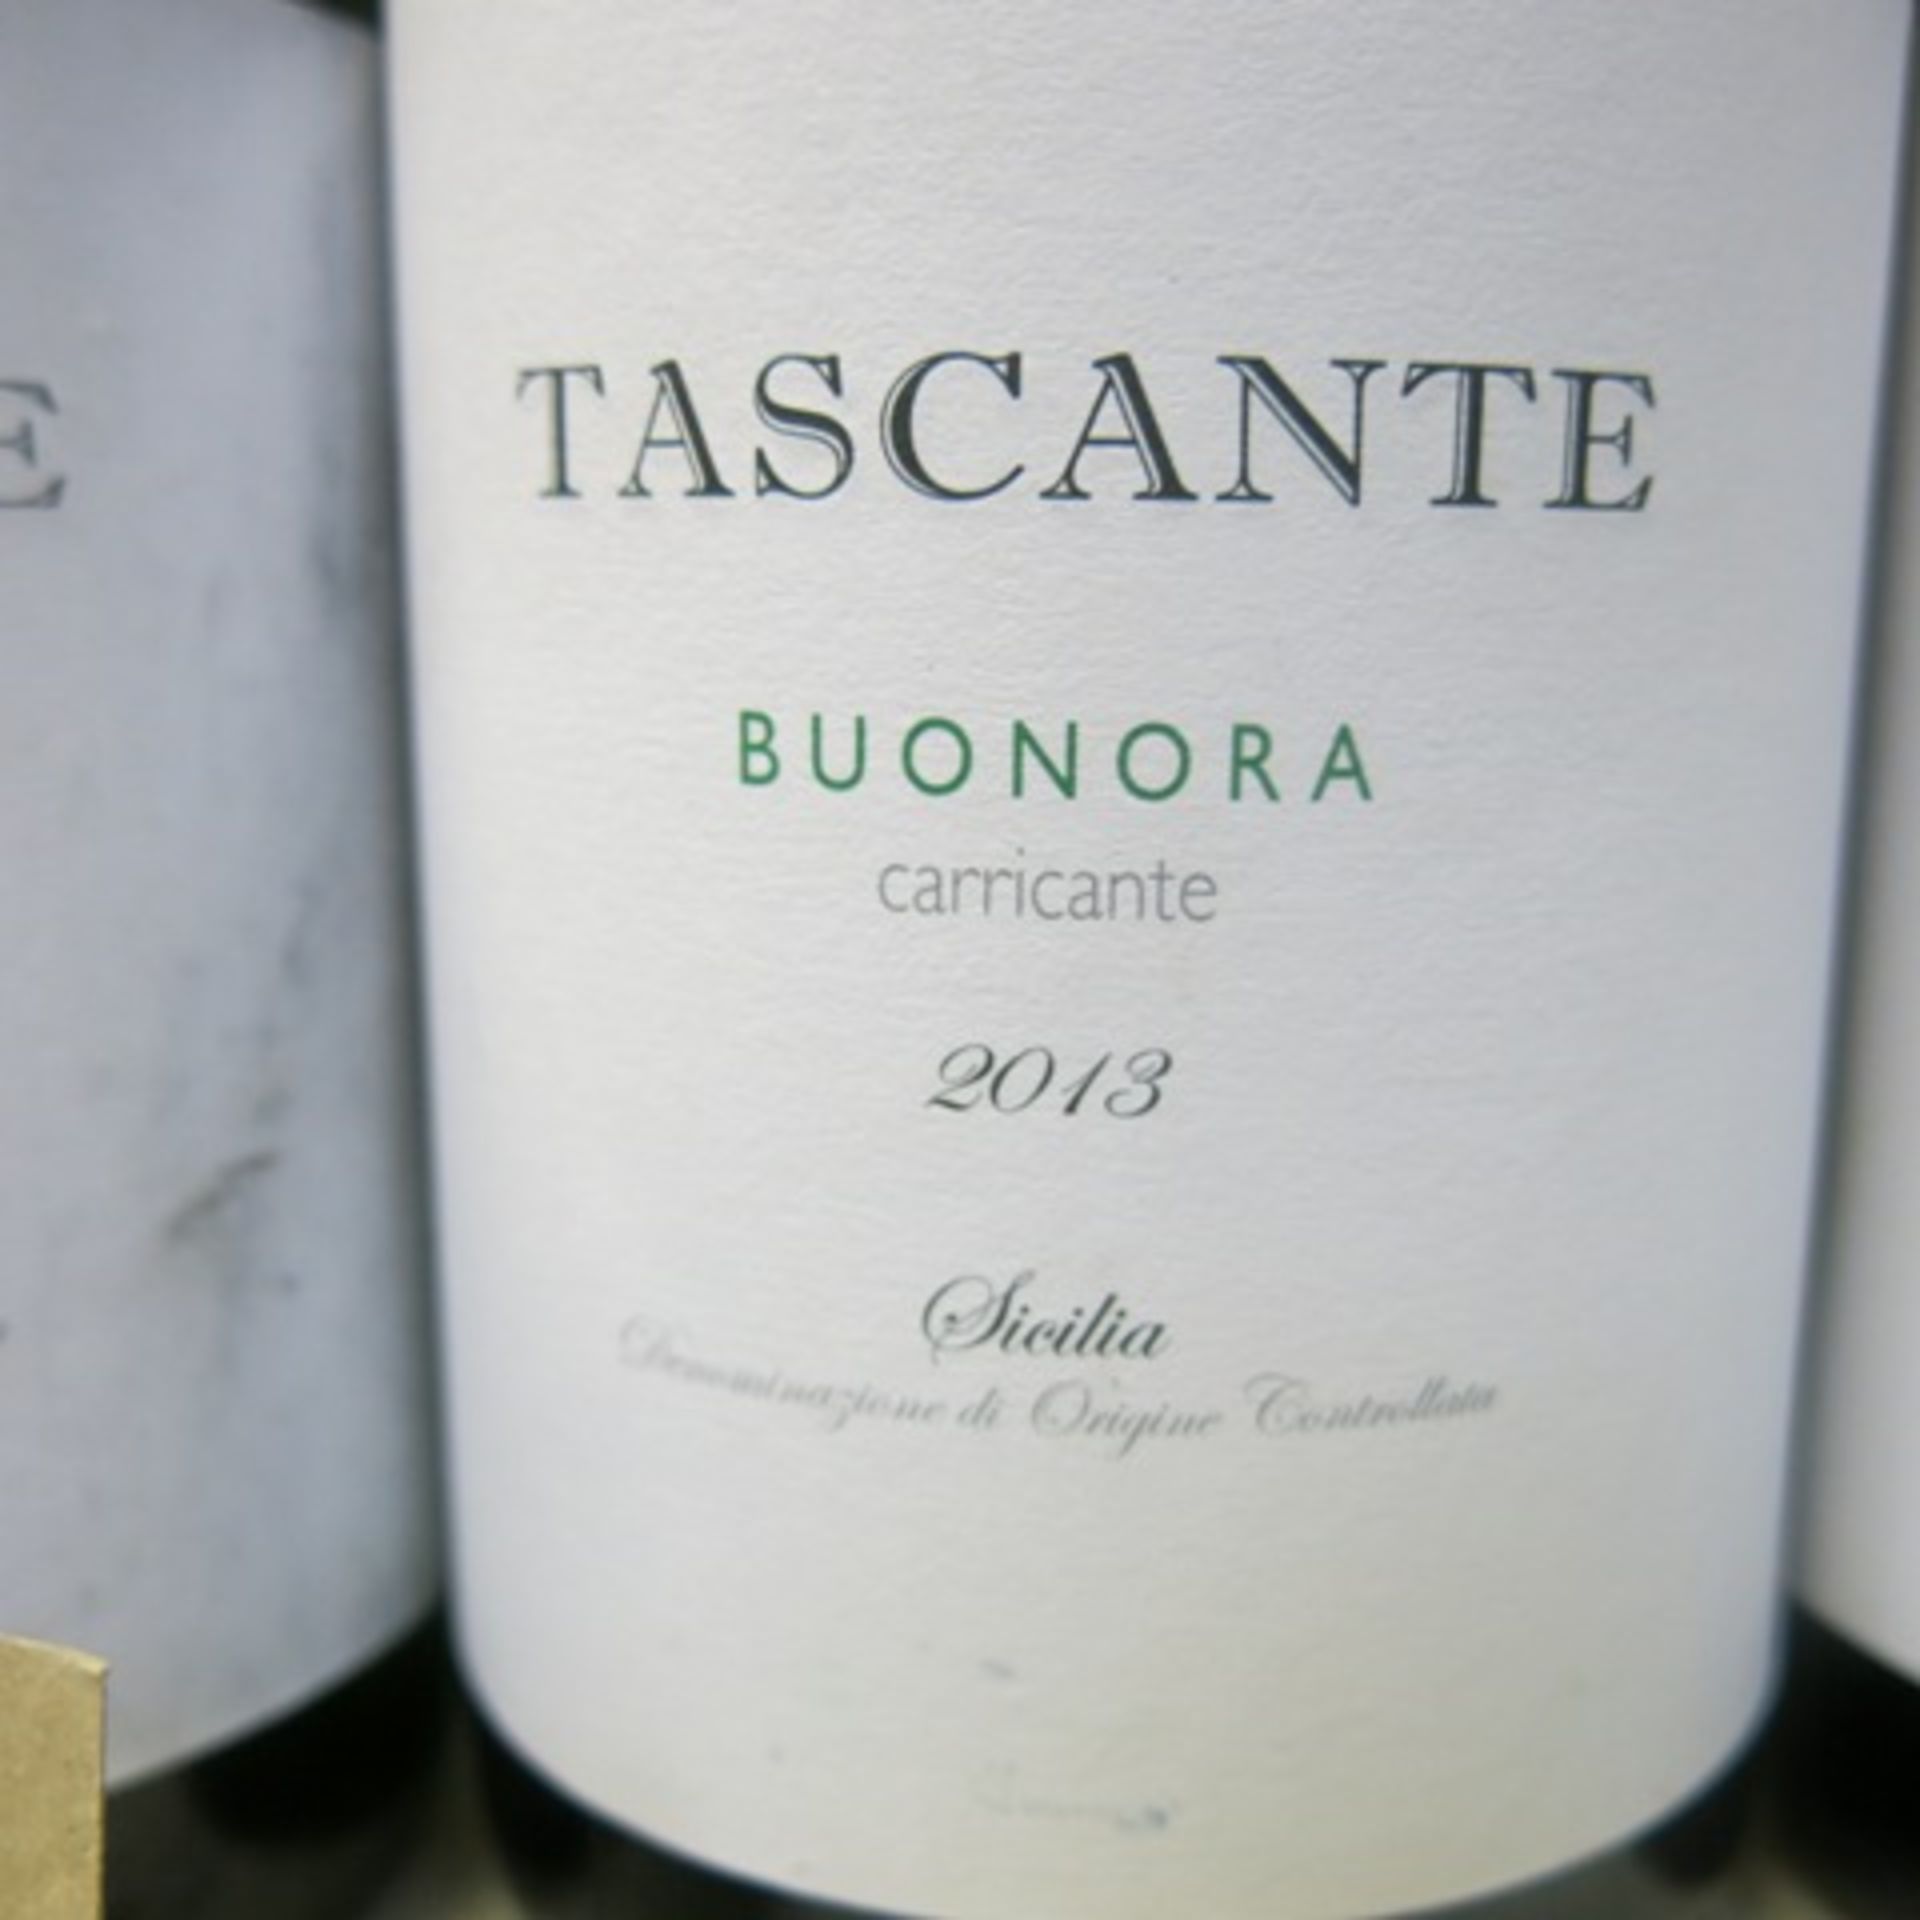 6 x Bottles of Tascante Buonora Carricante White Wine, Year 2013. Total RRP £120.00 - Image 2 of 3